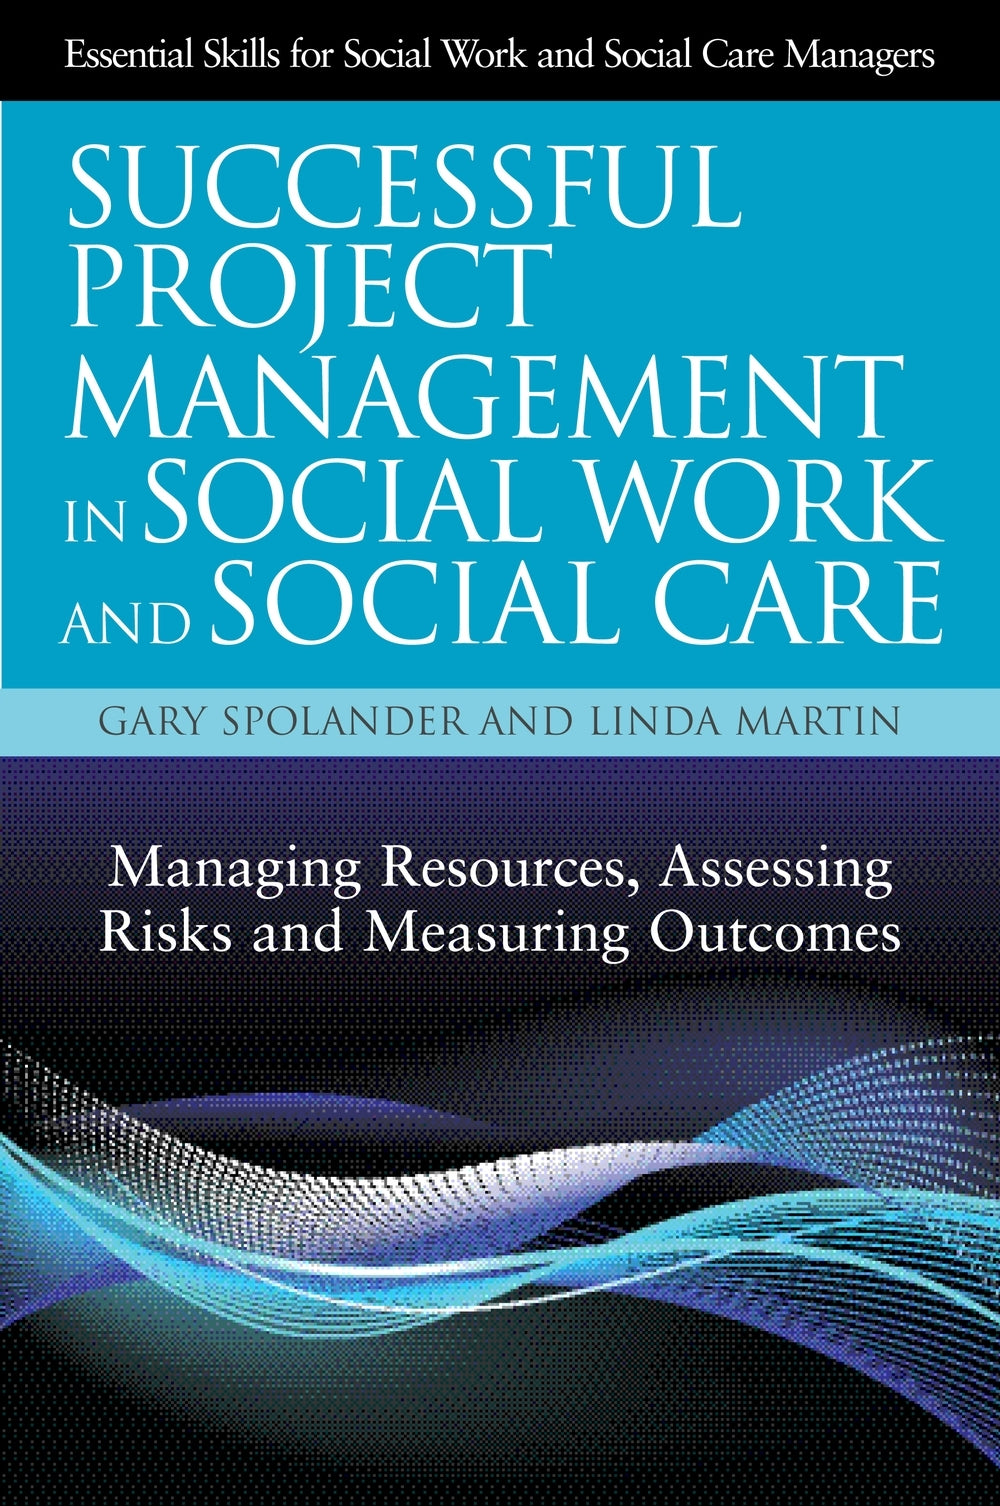 Successful Project Management in Social Work and Social Care by Trish Hafford-Letchfield, Gary Spolander, Linda Martin